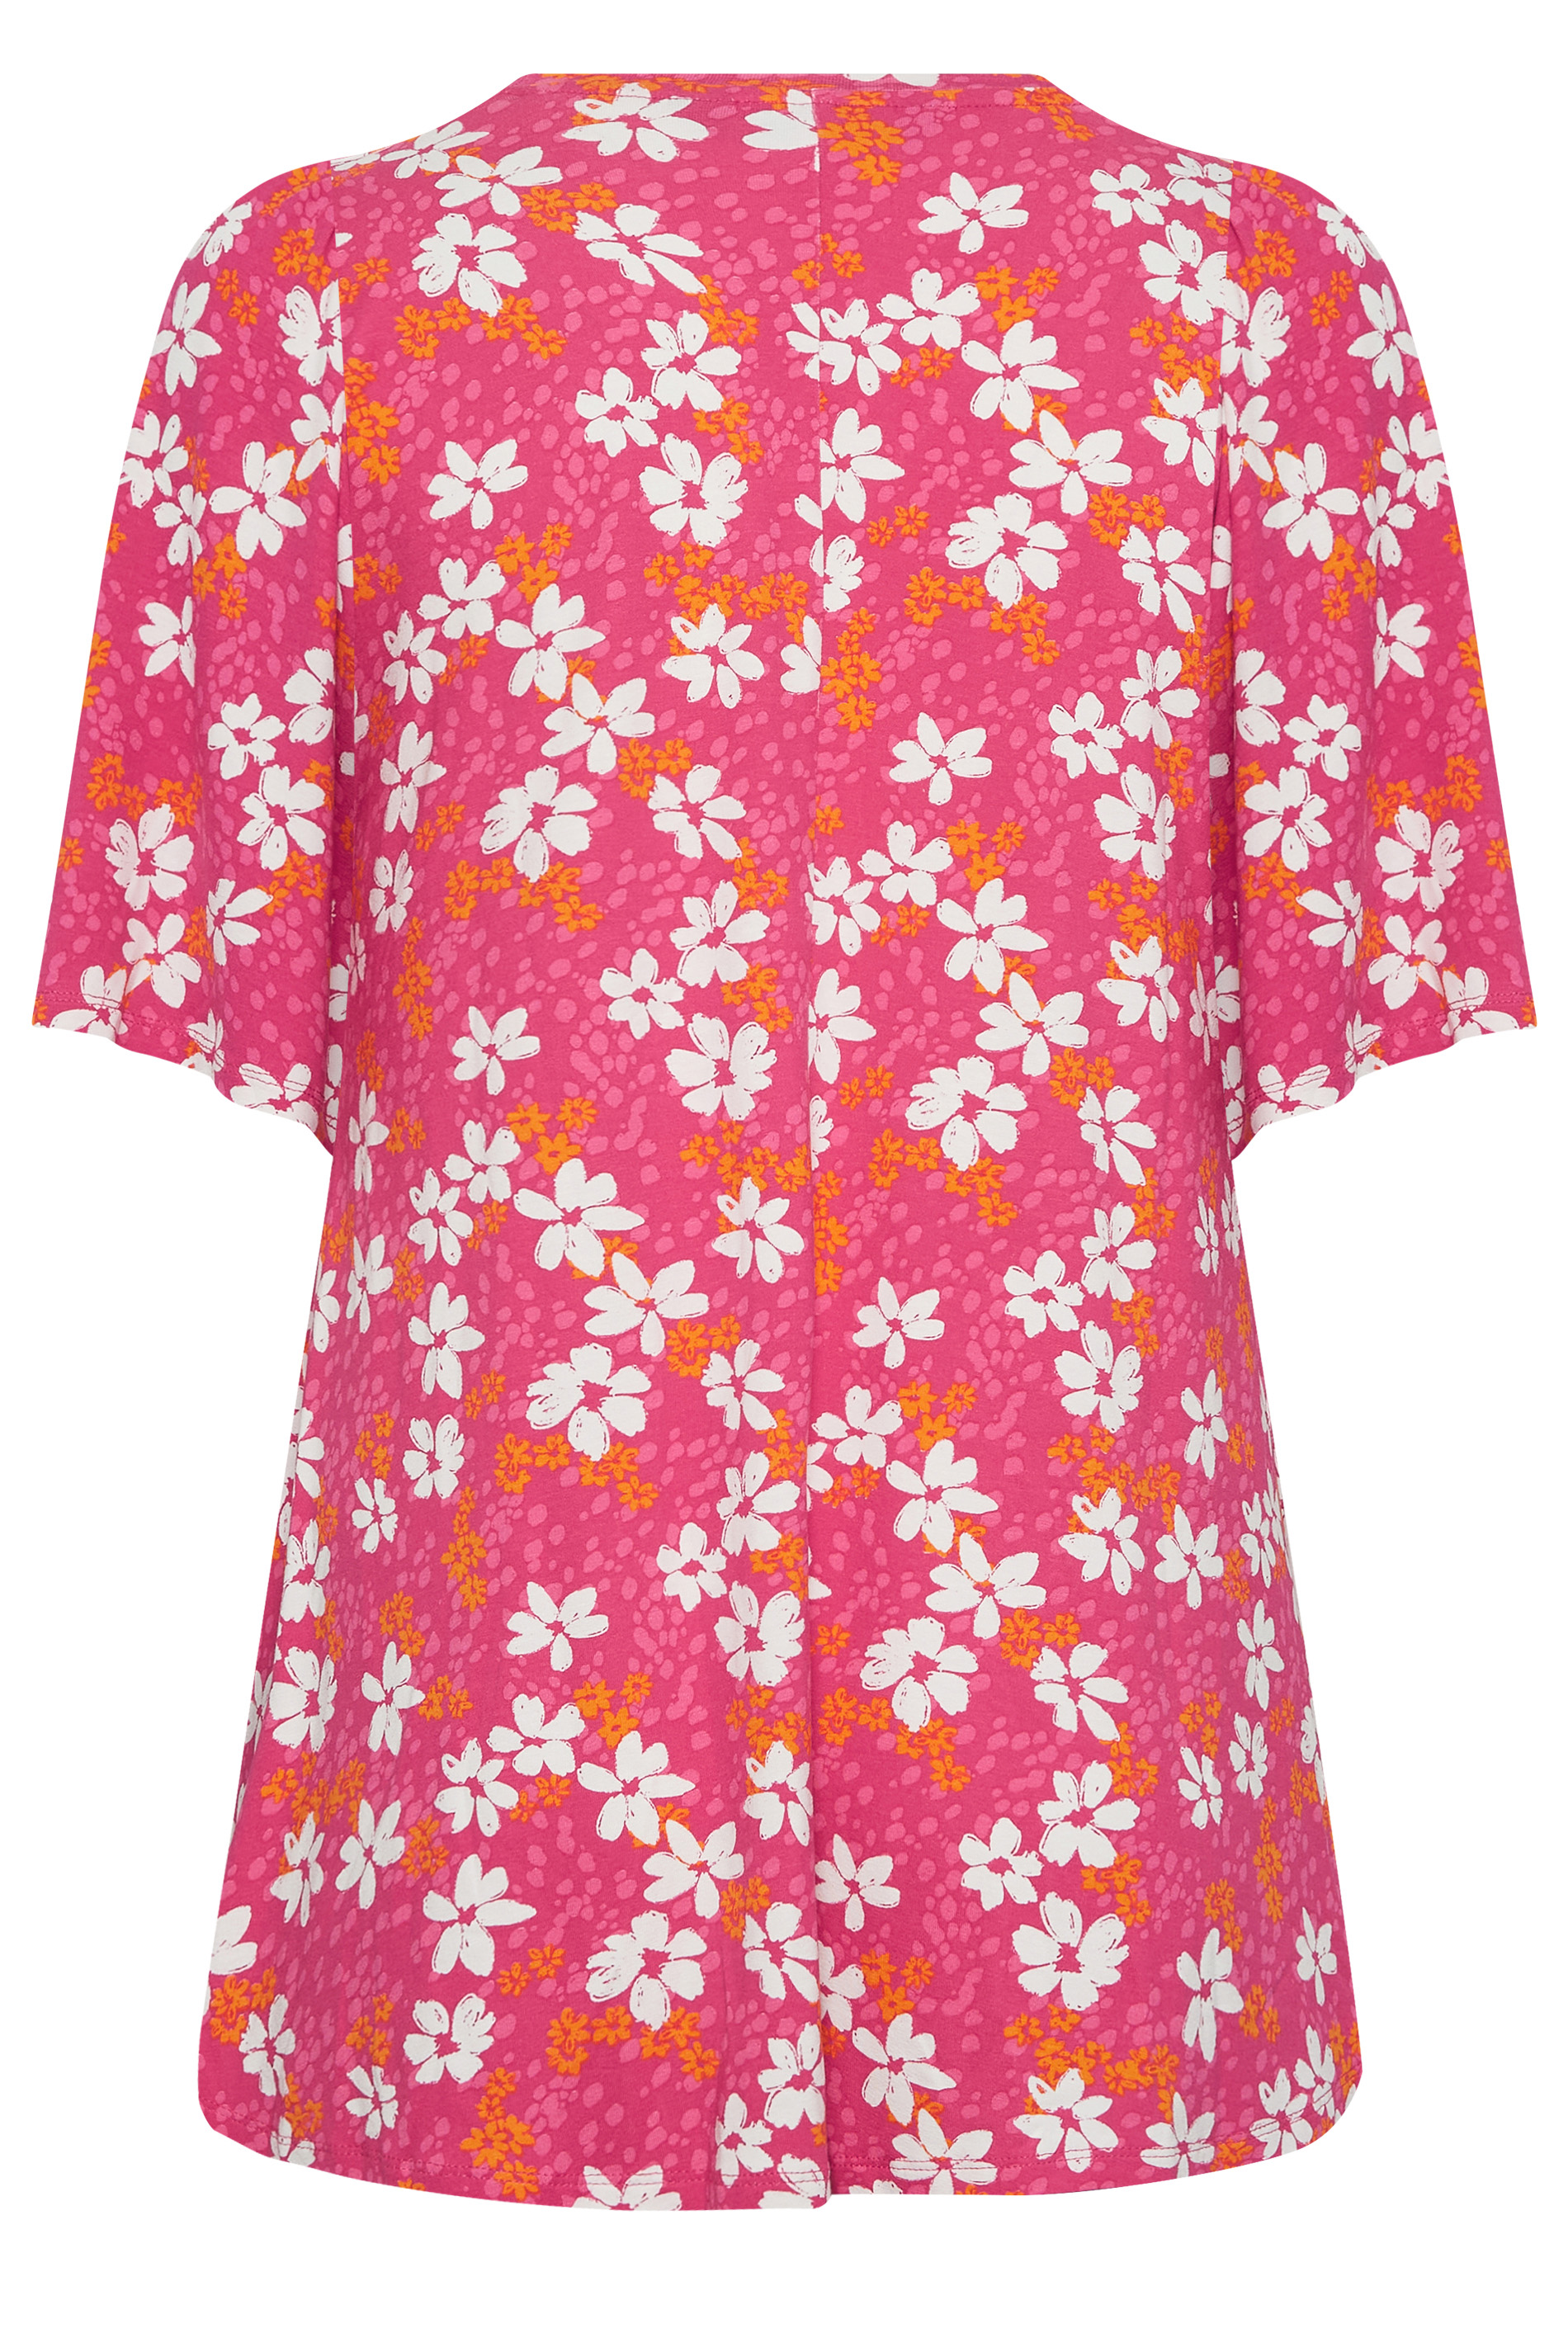 YOURS Curve Plus Size Pink Floral Ditsy Top | Yours Clothing